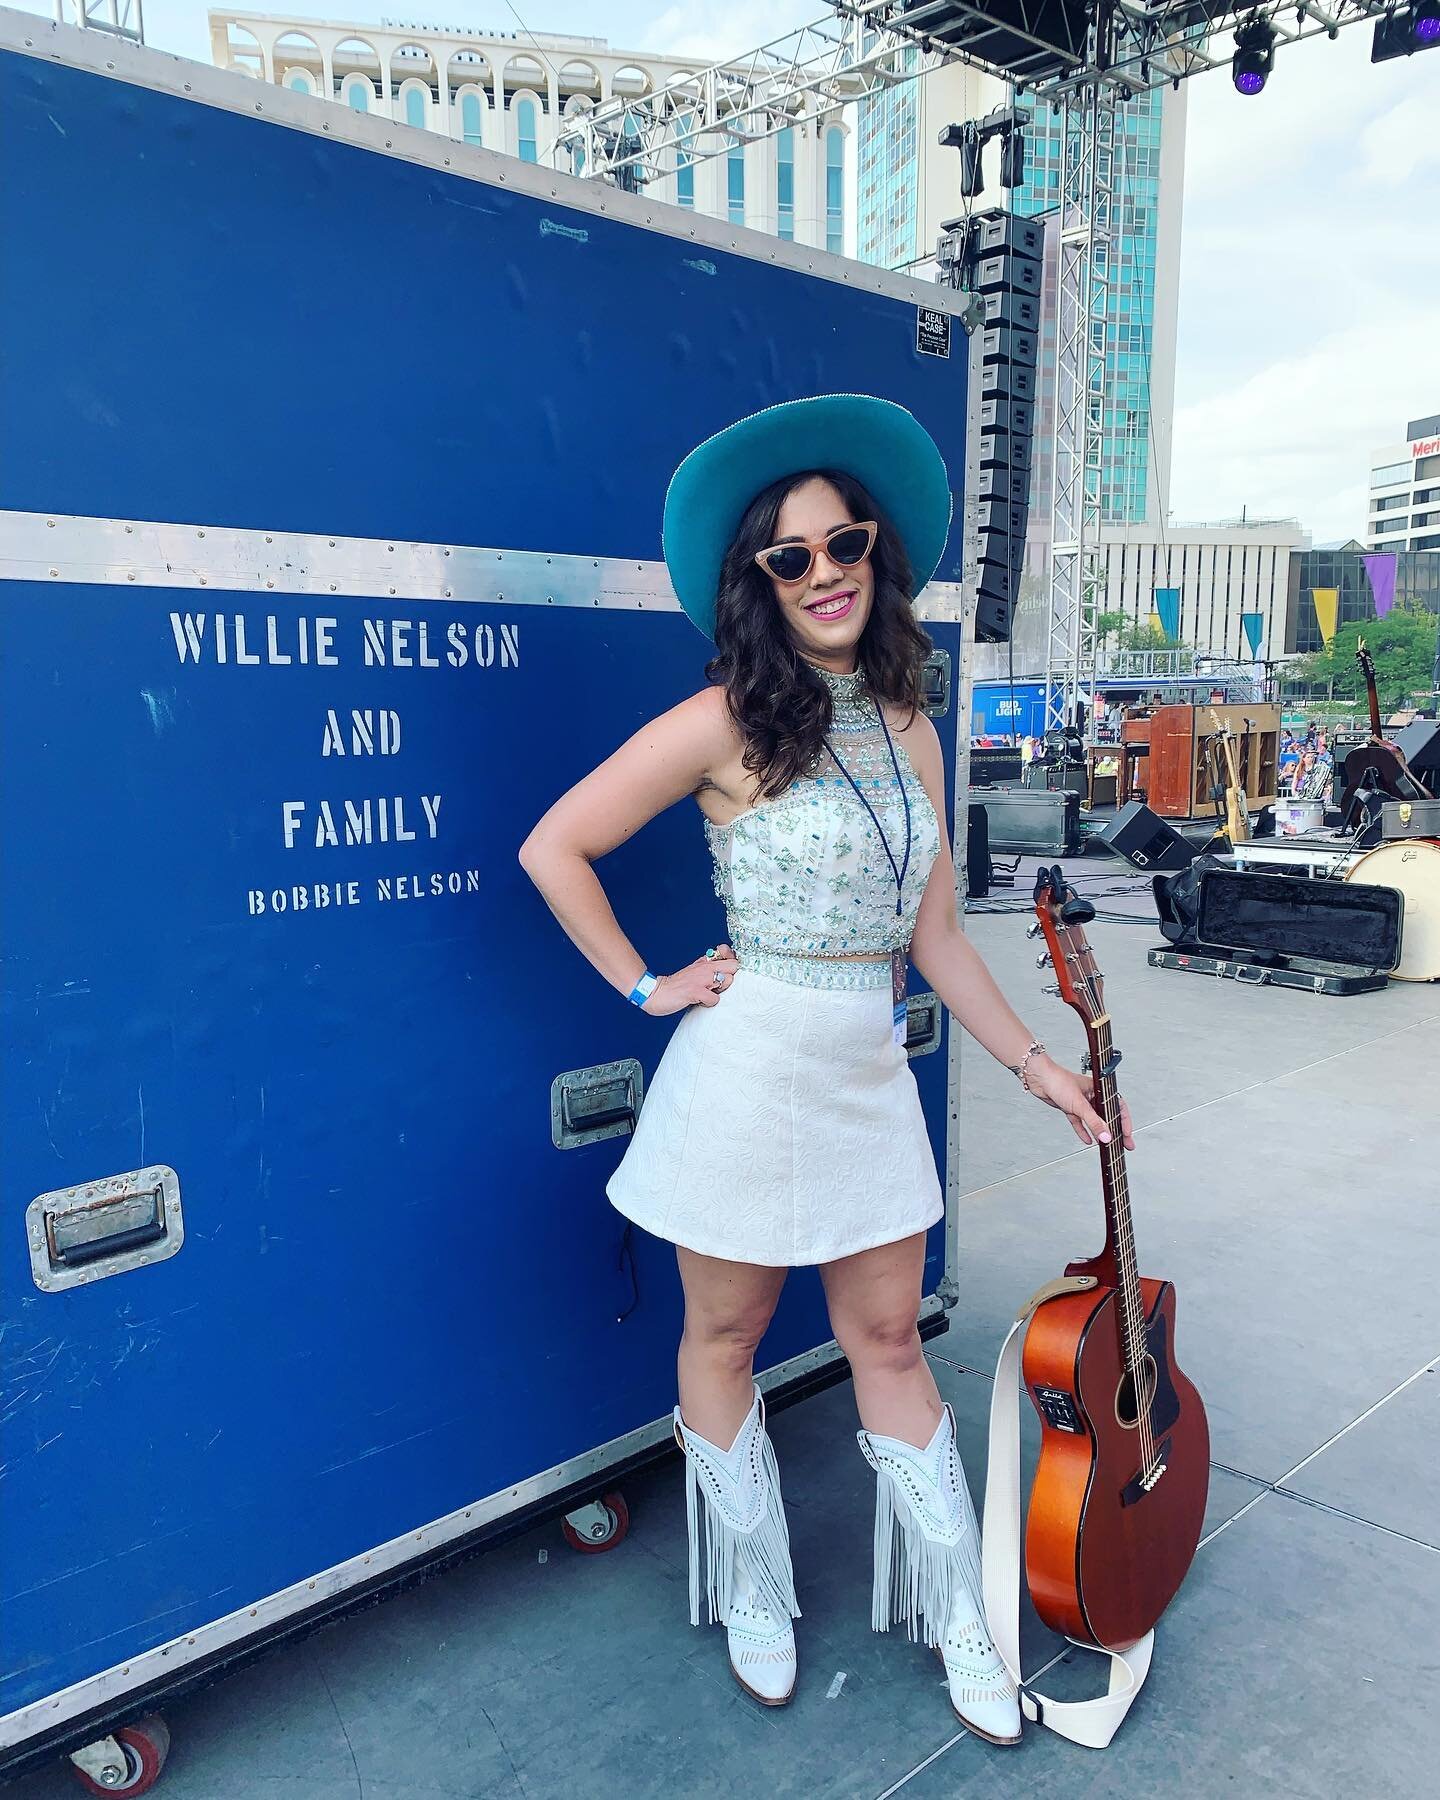 Epic #westernwednesday✨Knew I wanted to go full rhinestone cowgirl to open for Willie, had a blast getting this &lsquo;fit made 🦋

👗 Sequin two-piece is a mermaid prom dress turned into a mini skirt! s/o Martha at West Alterations
🤠 Custom teal ha